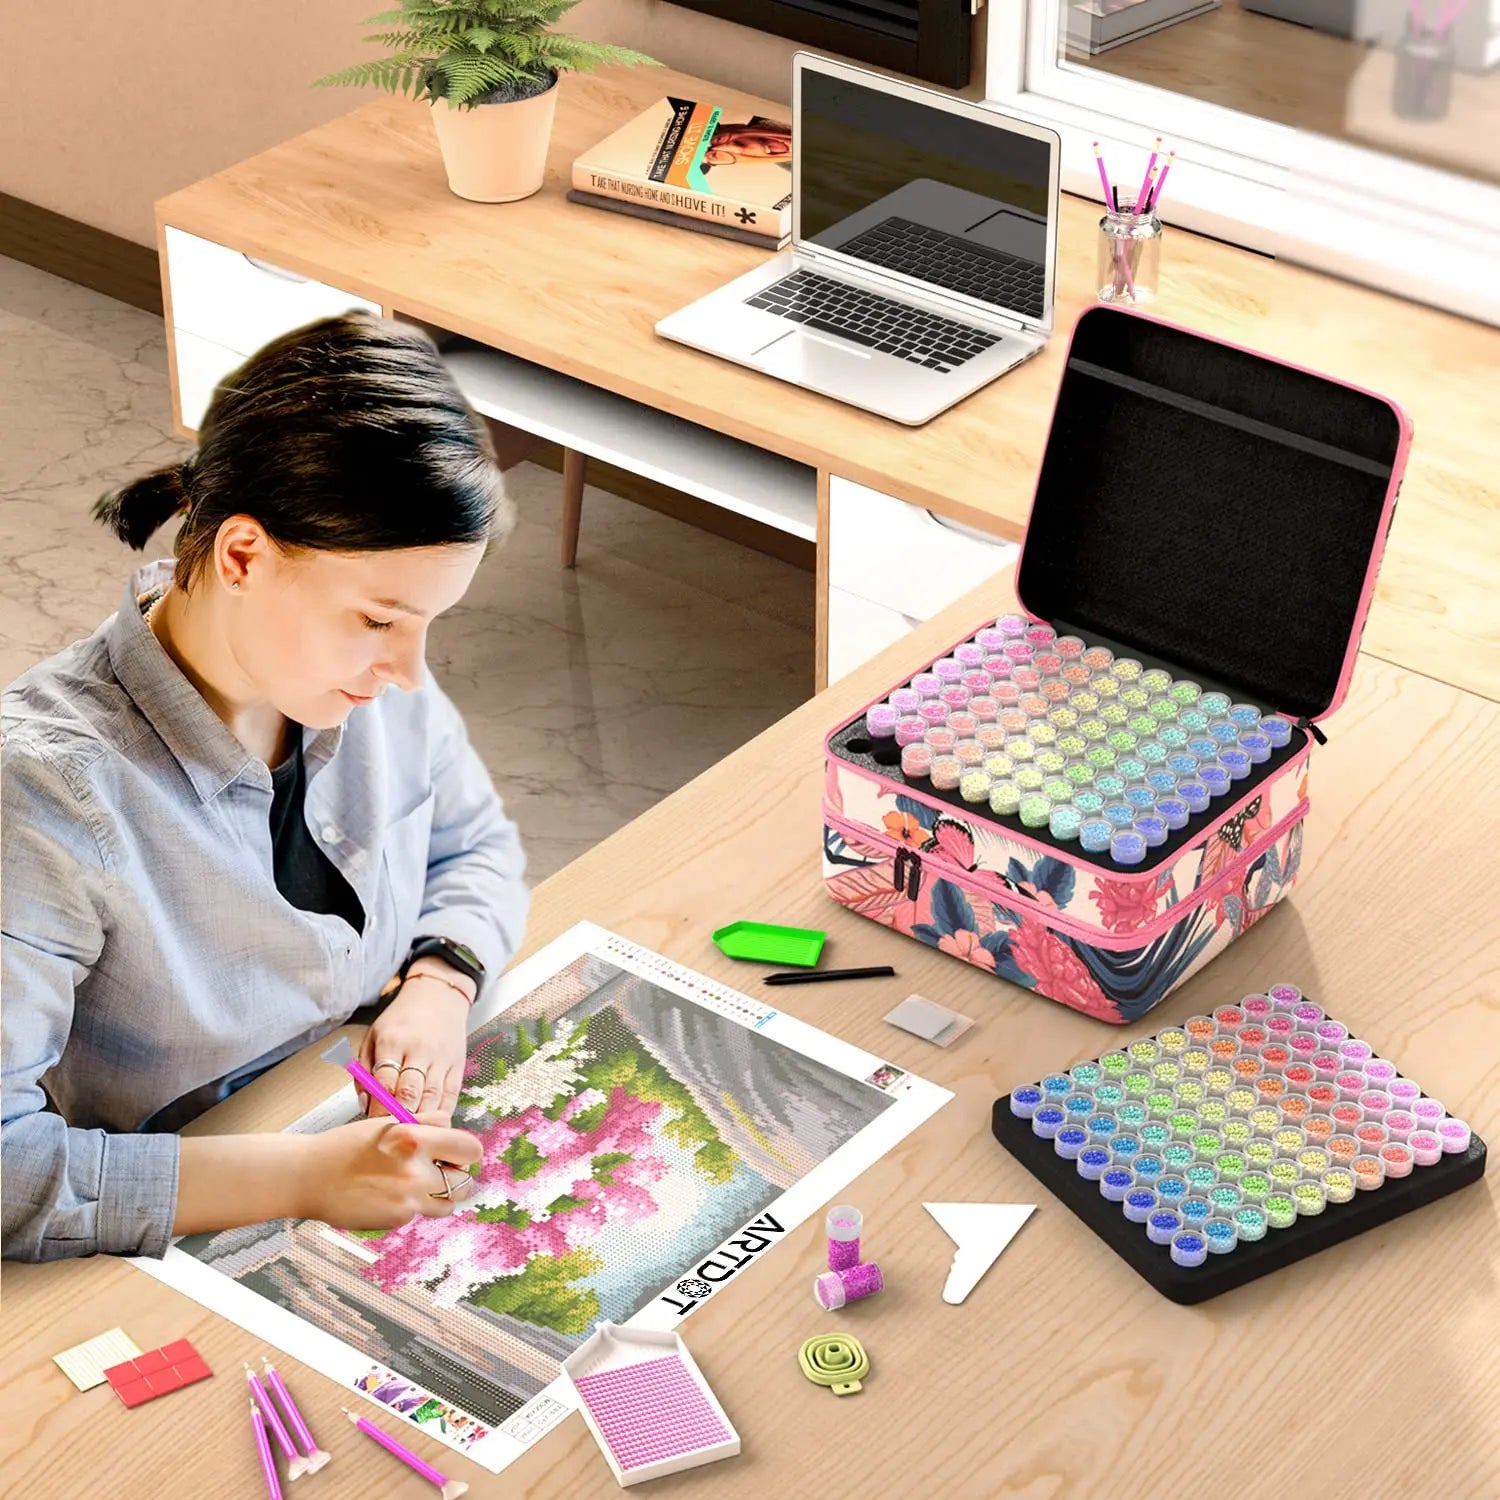  ARTDOT Diamond Painting Accessories for Diamond Art Kits, A4  Light Board and 30 Slots Diamond Painting Storage Containers